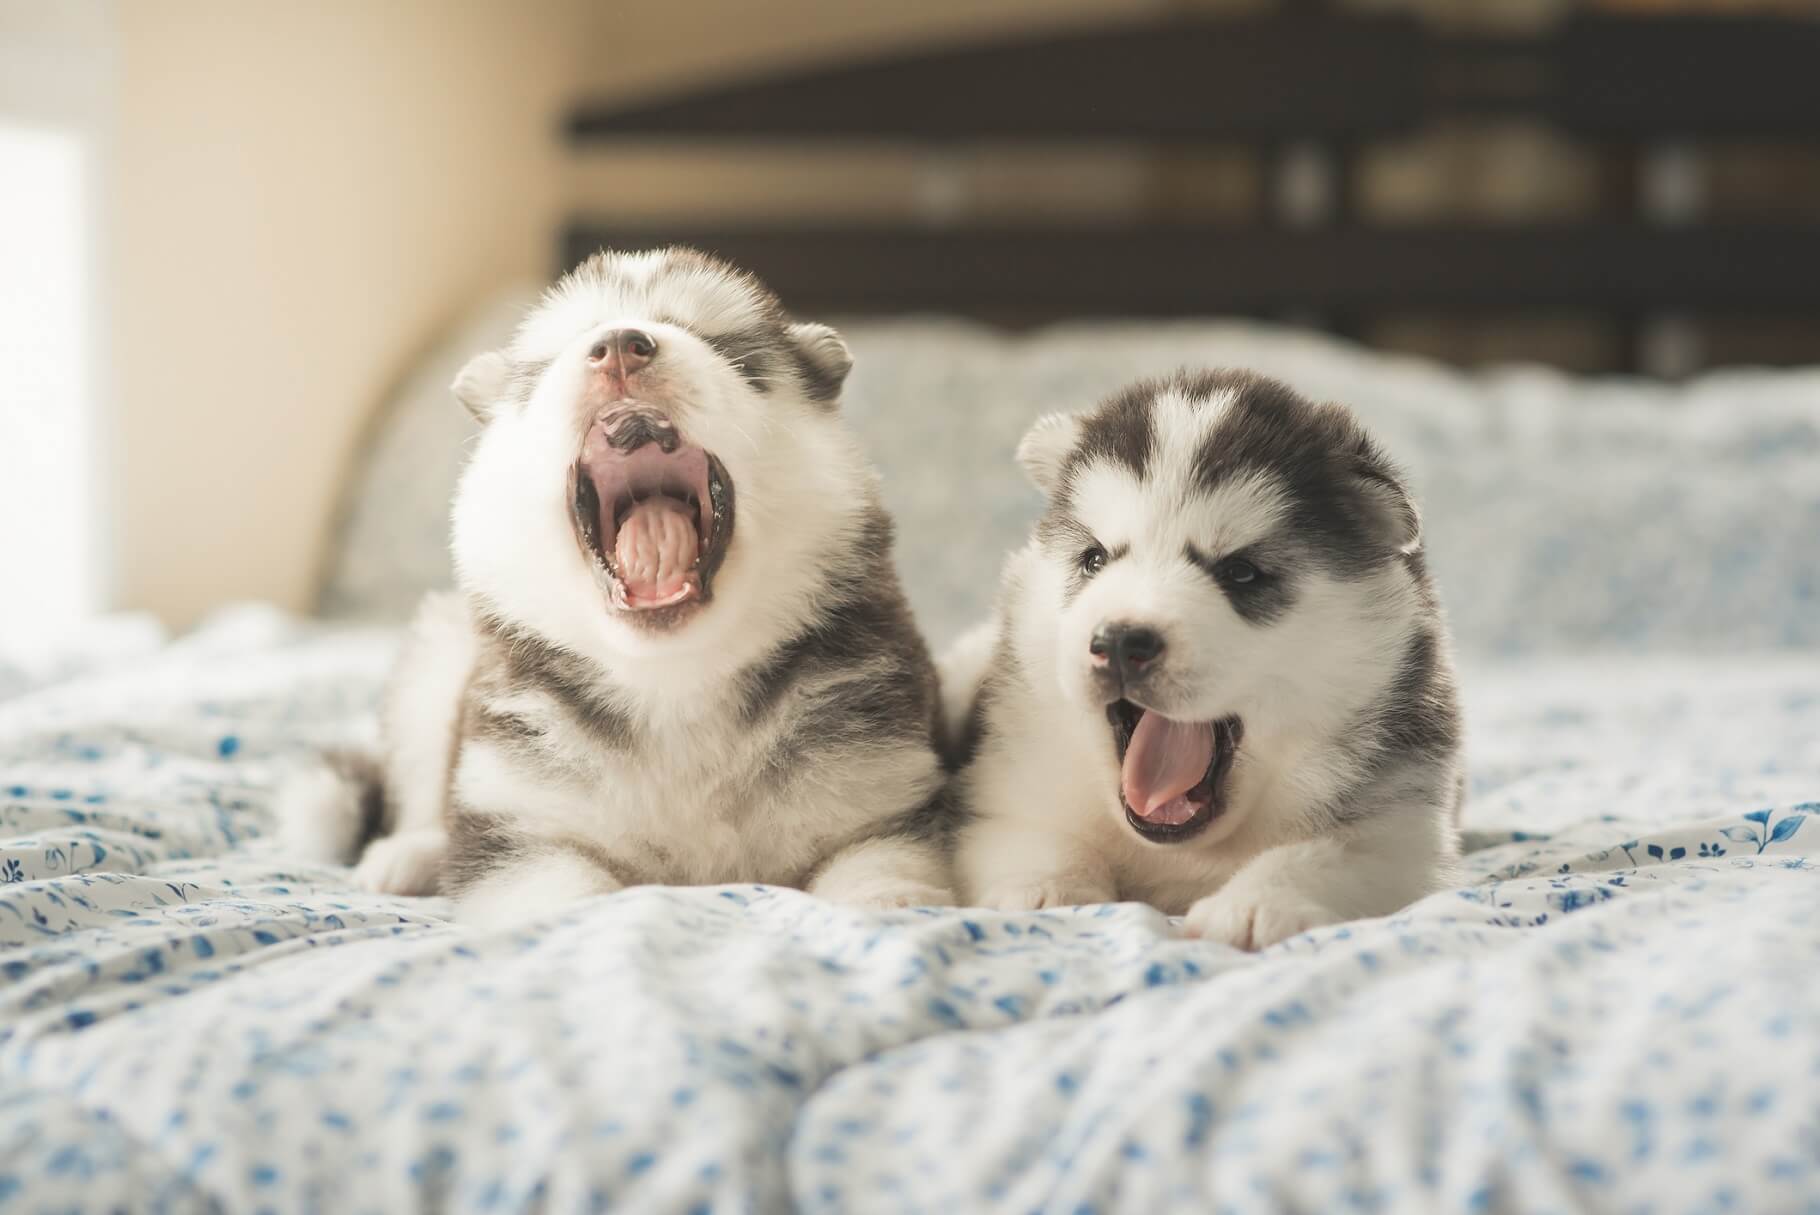 Two very young puppies laying on a persons bed yawning